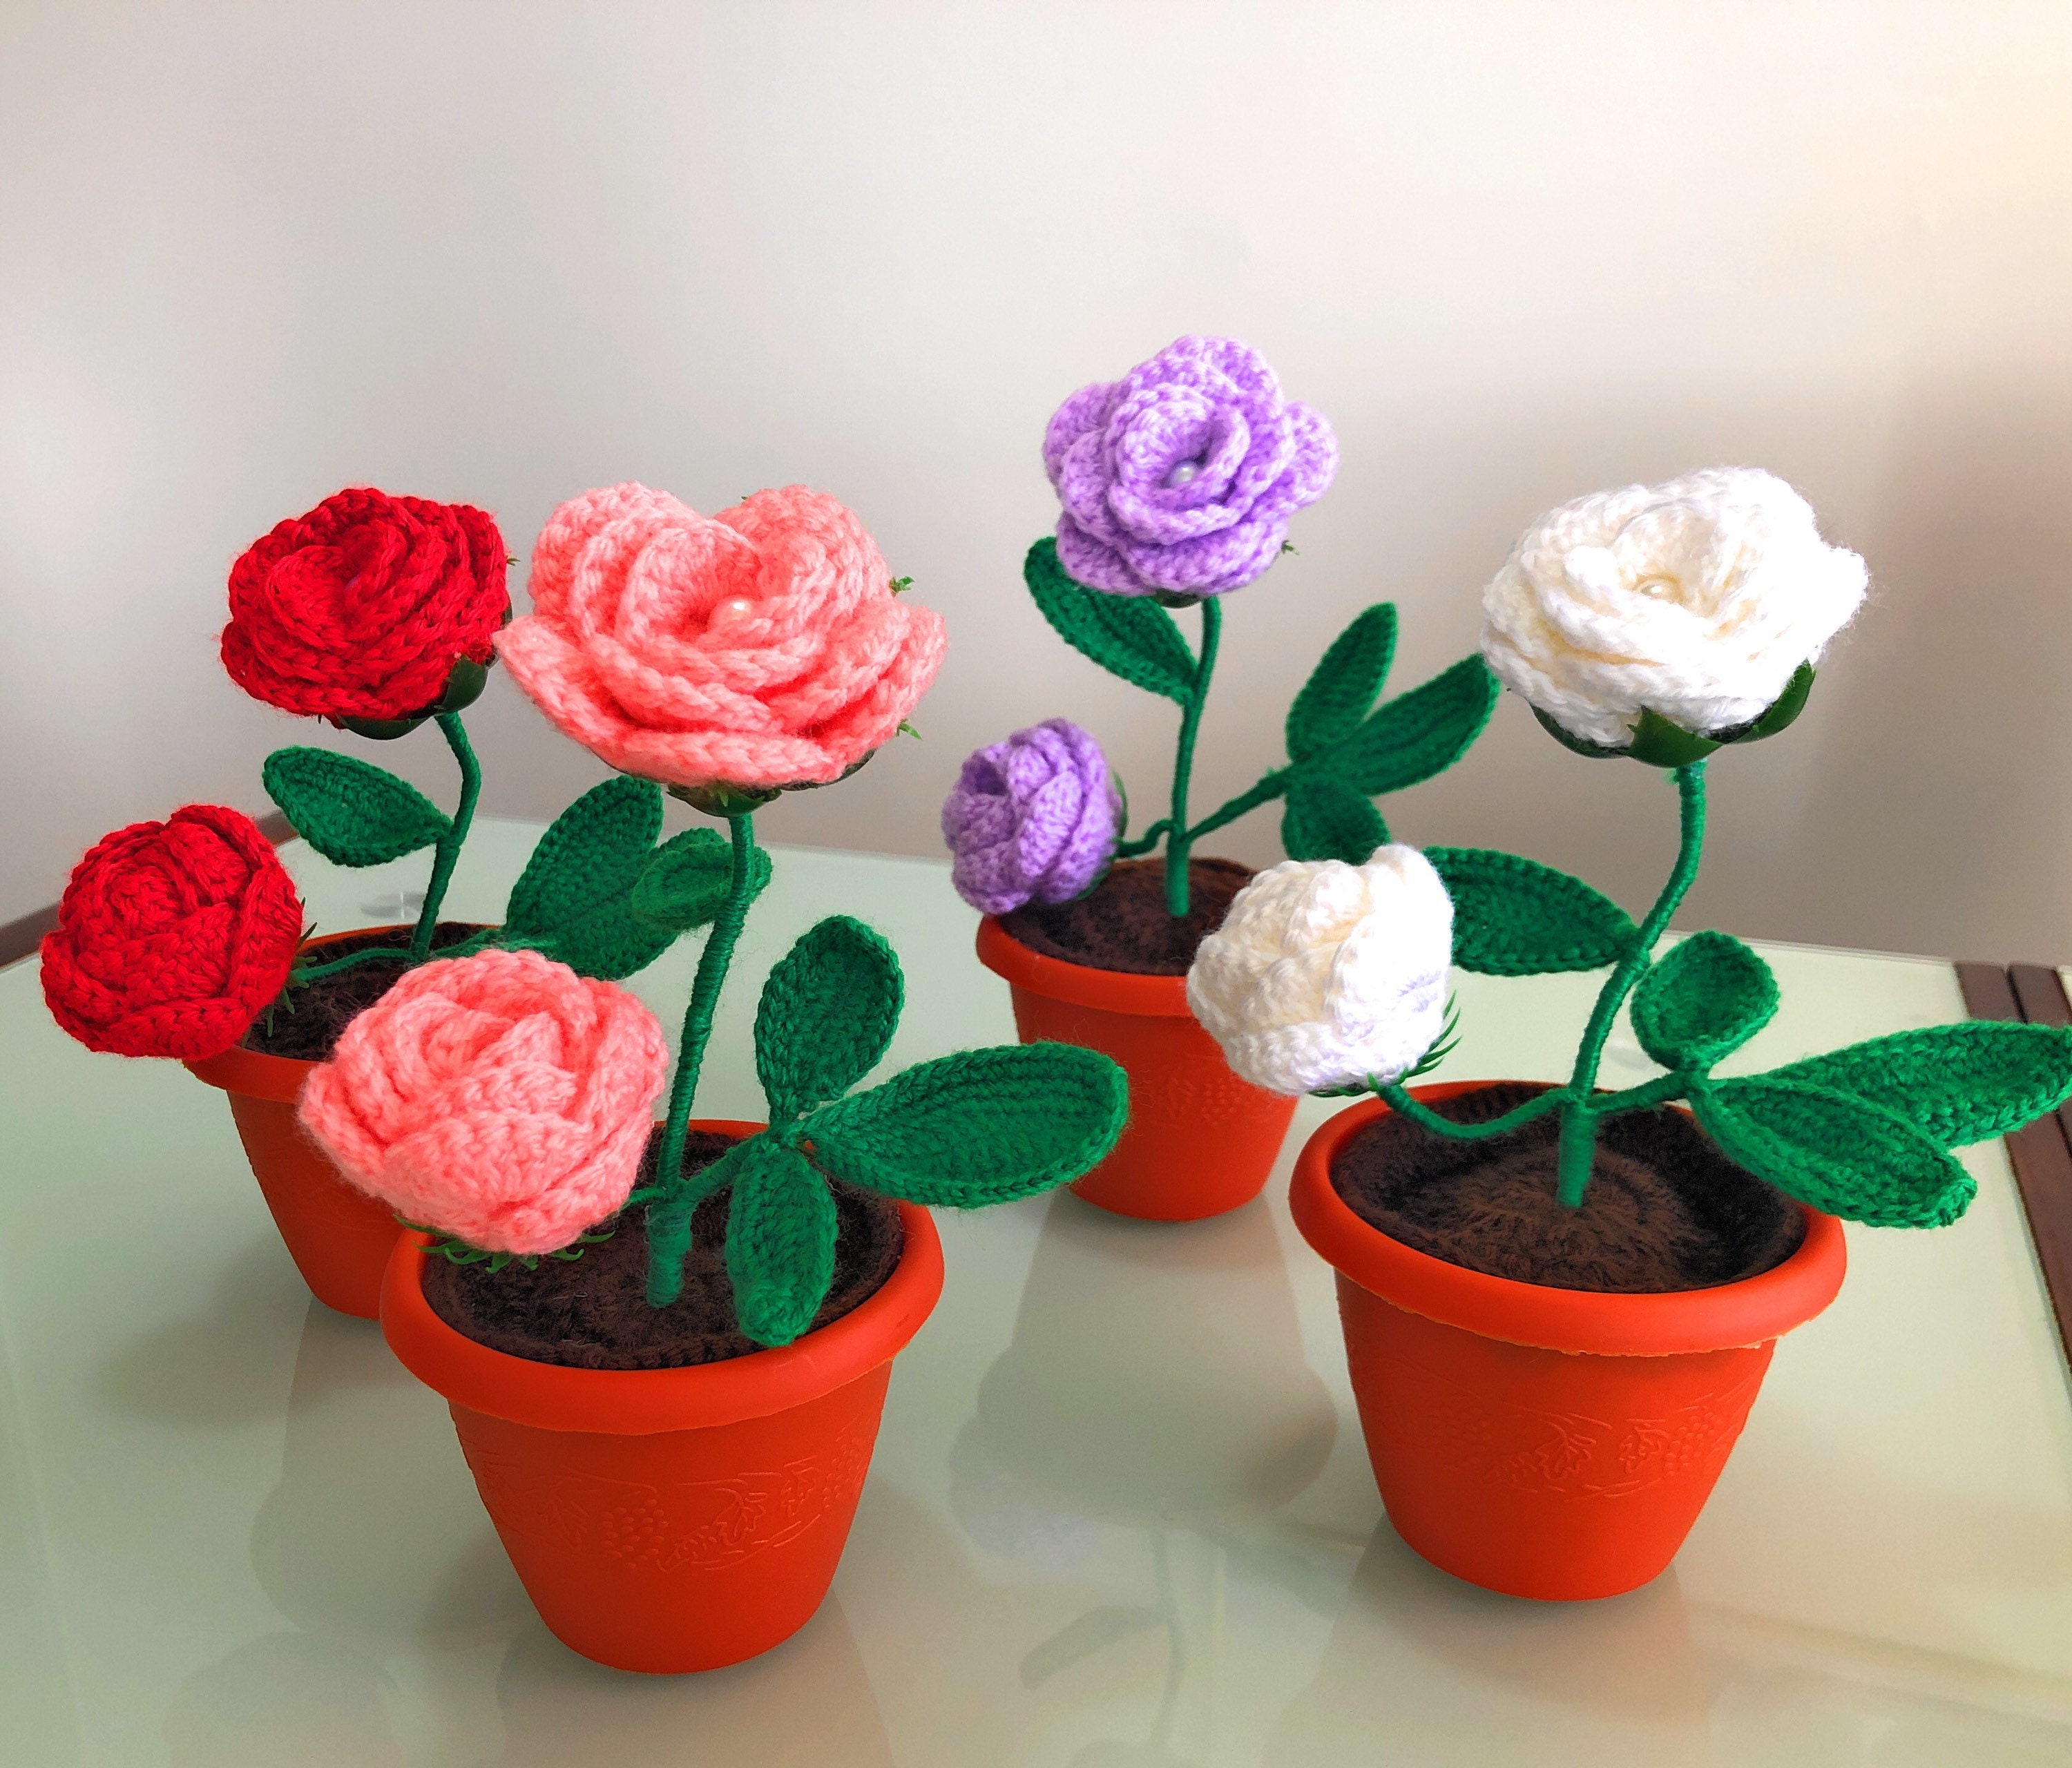 Beginner's Diy Crochet Flower Kit, Romantic Knitted Rose Pot, Simple To  Learn, Suitable For Newbies, Used For Festival Gifts, Decoration